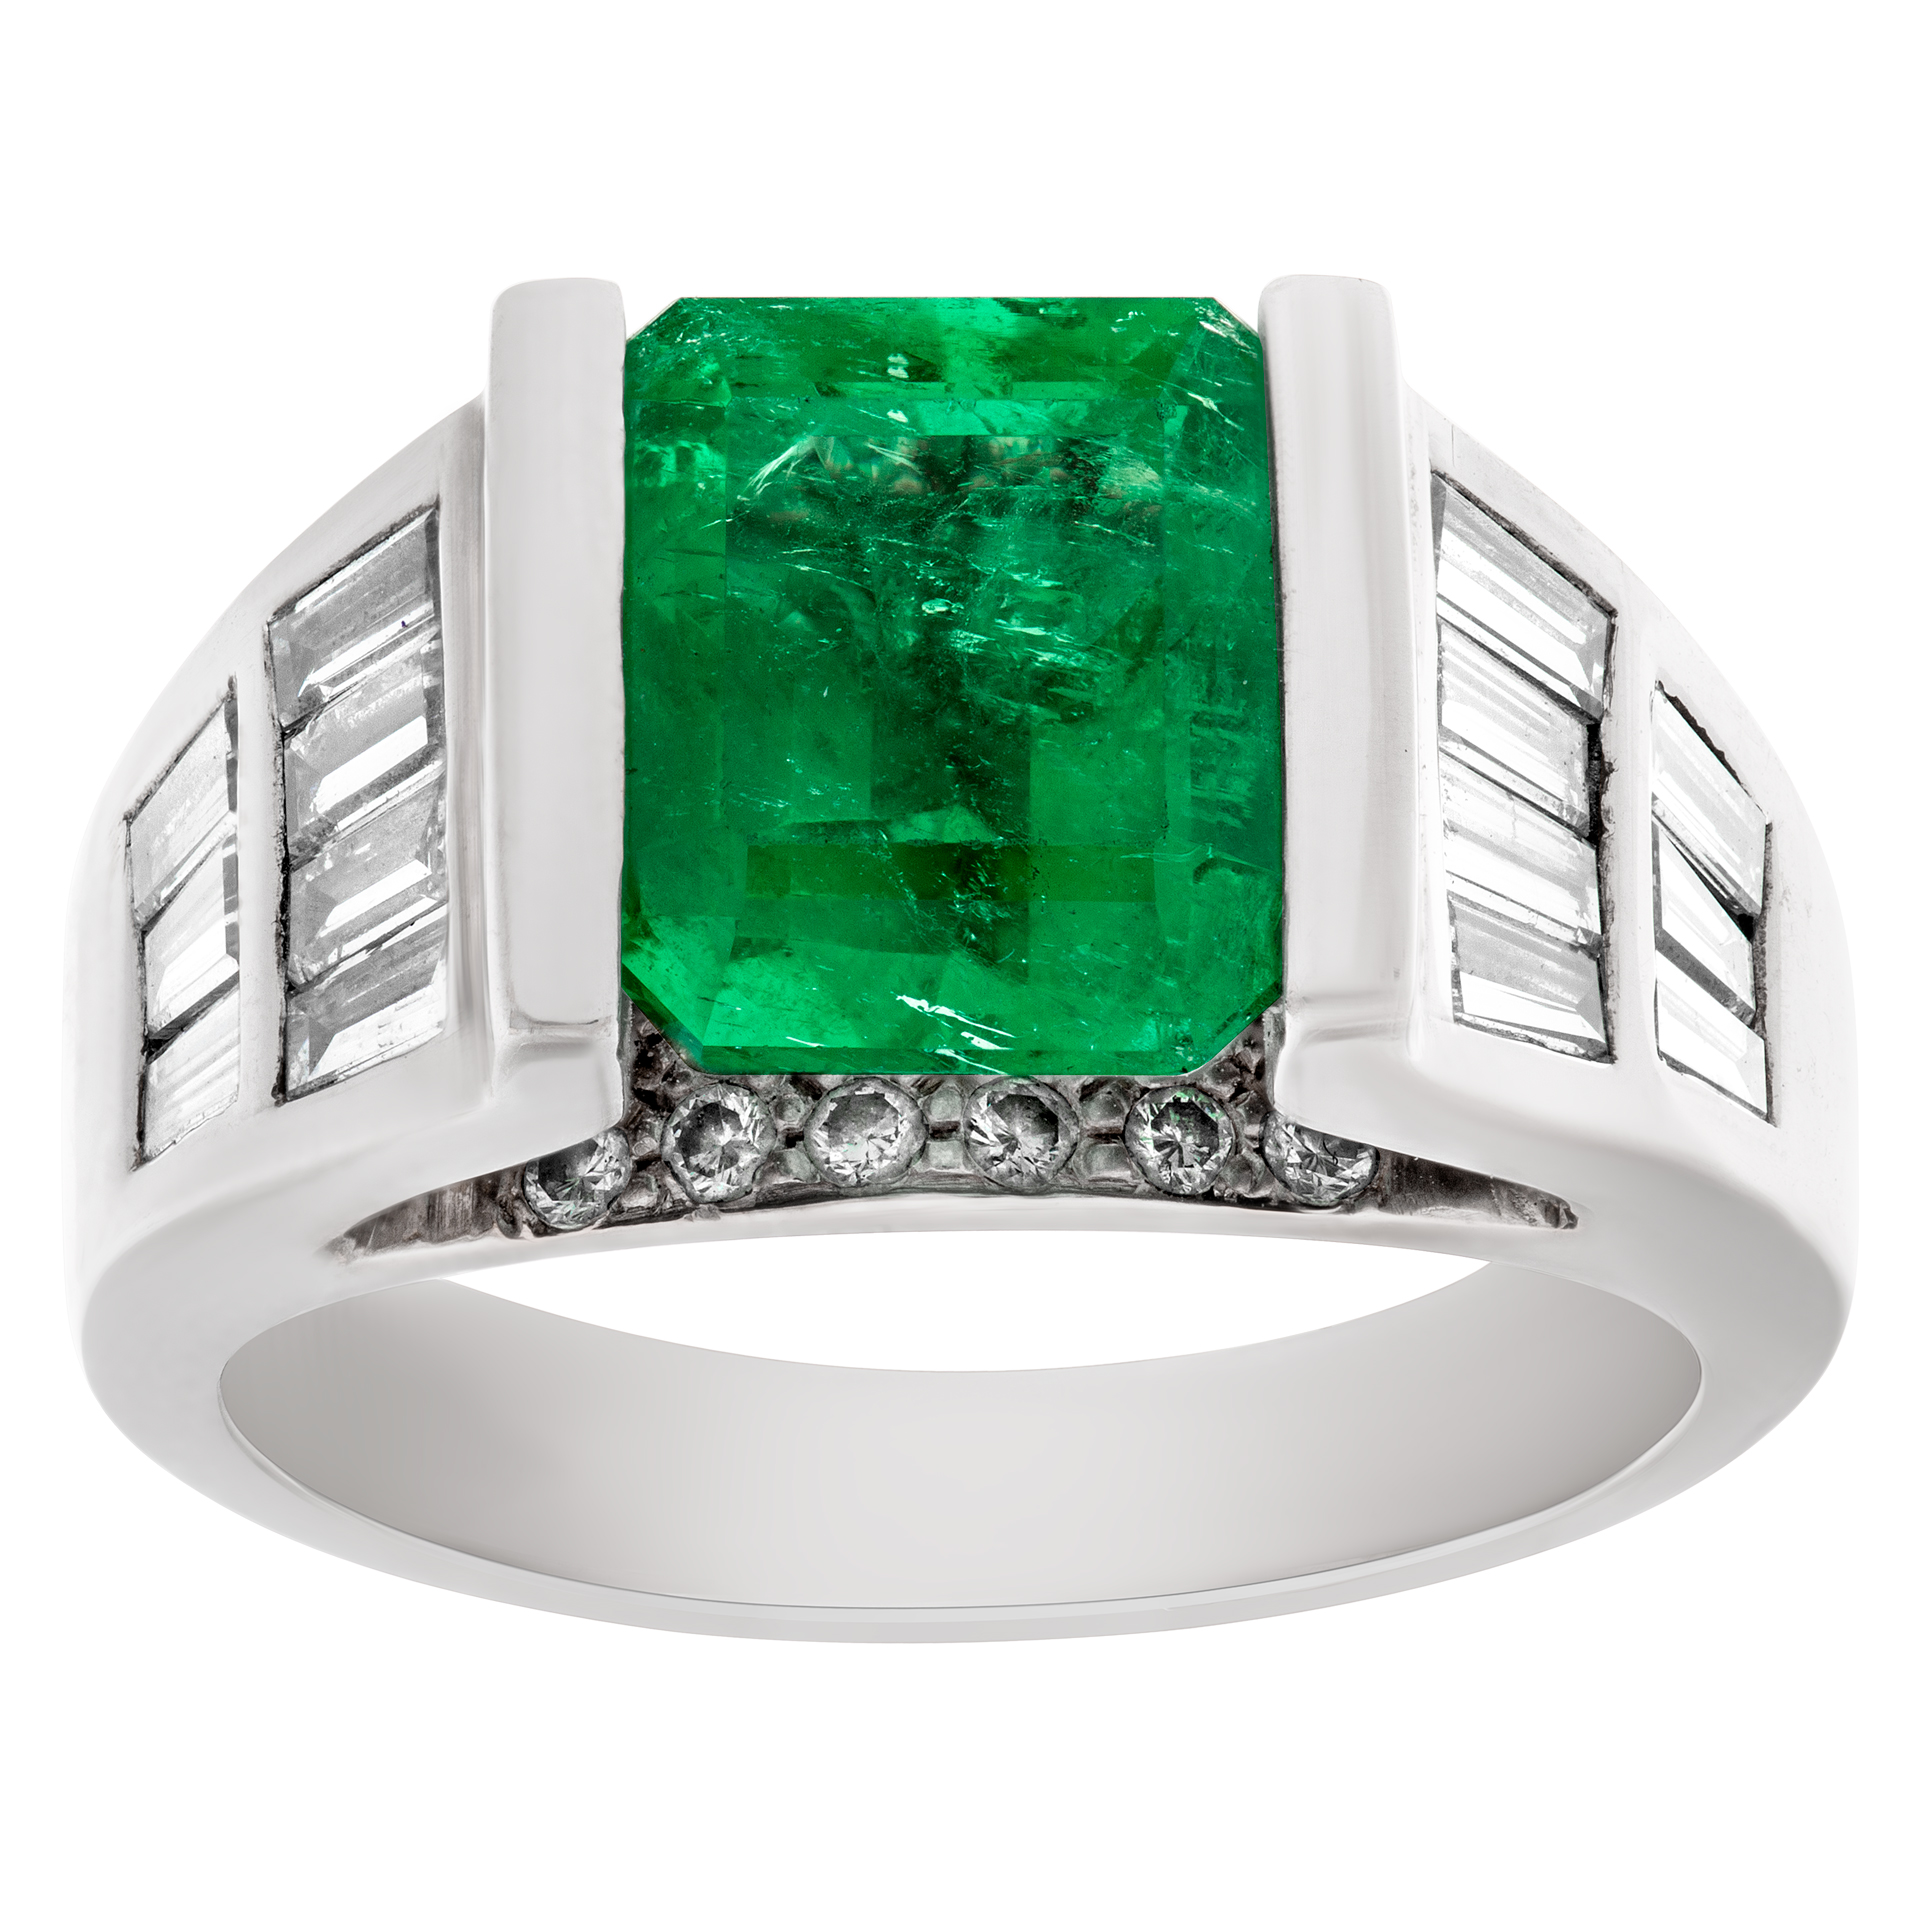 Emerald ring in 14k white gold. 3.16 Carat emerald, 1.05 Cts in diamonds. image 1